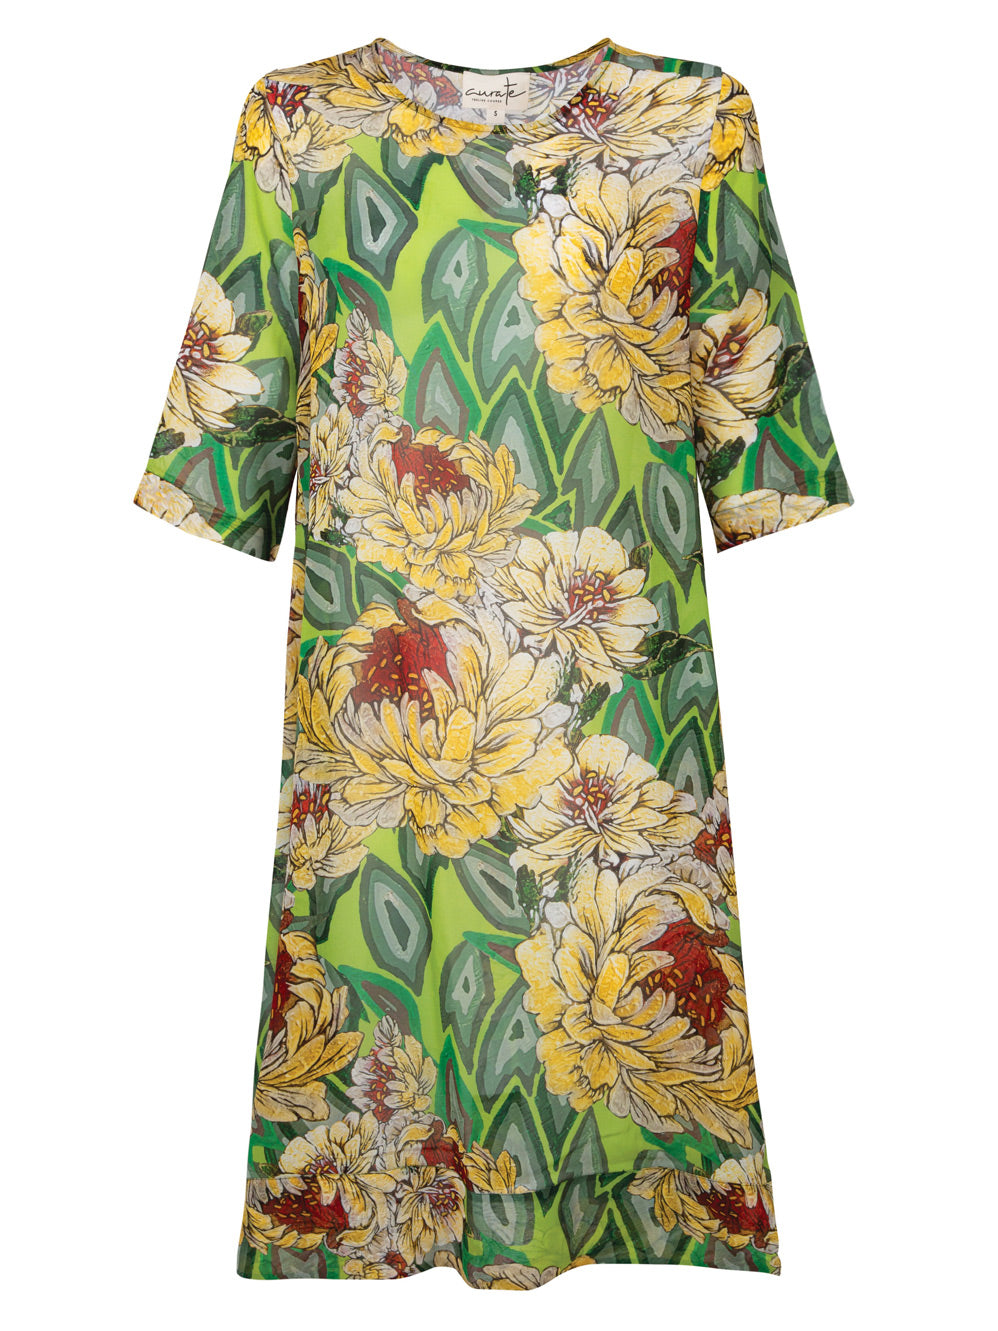 CURATE BY TRELISE COOPER FACE THE TUNIC DRESS